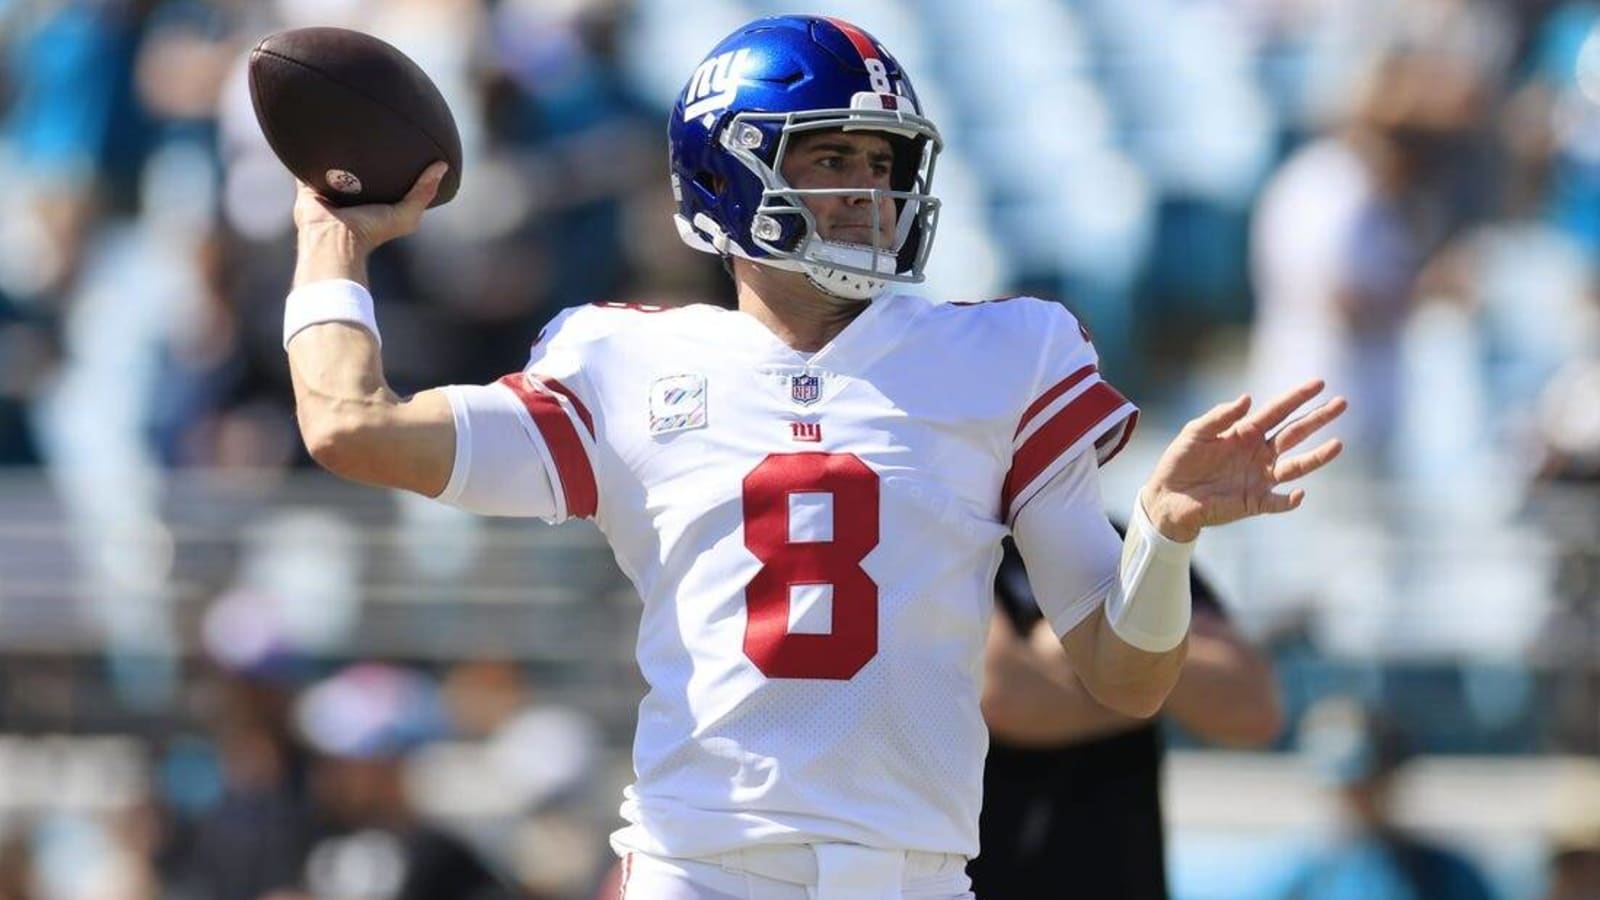 Giants fend off Jaguars to improve to 6-1